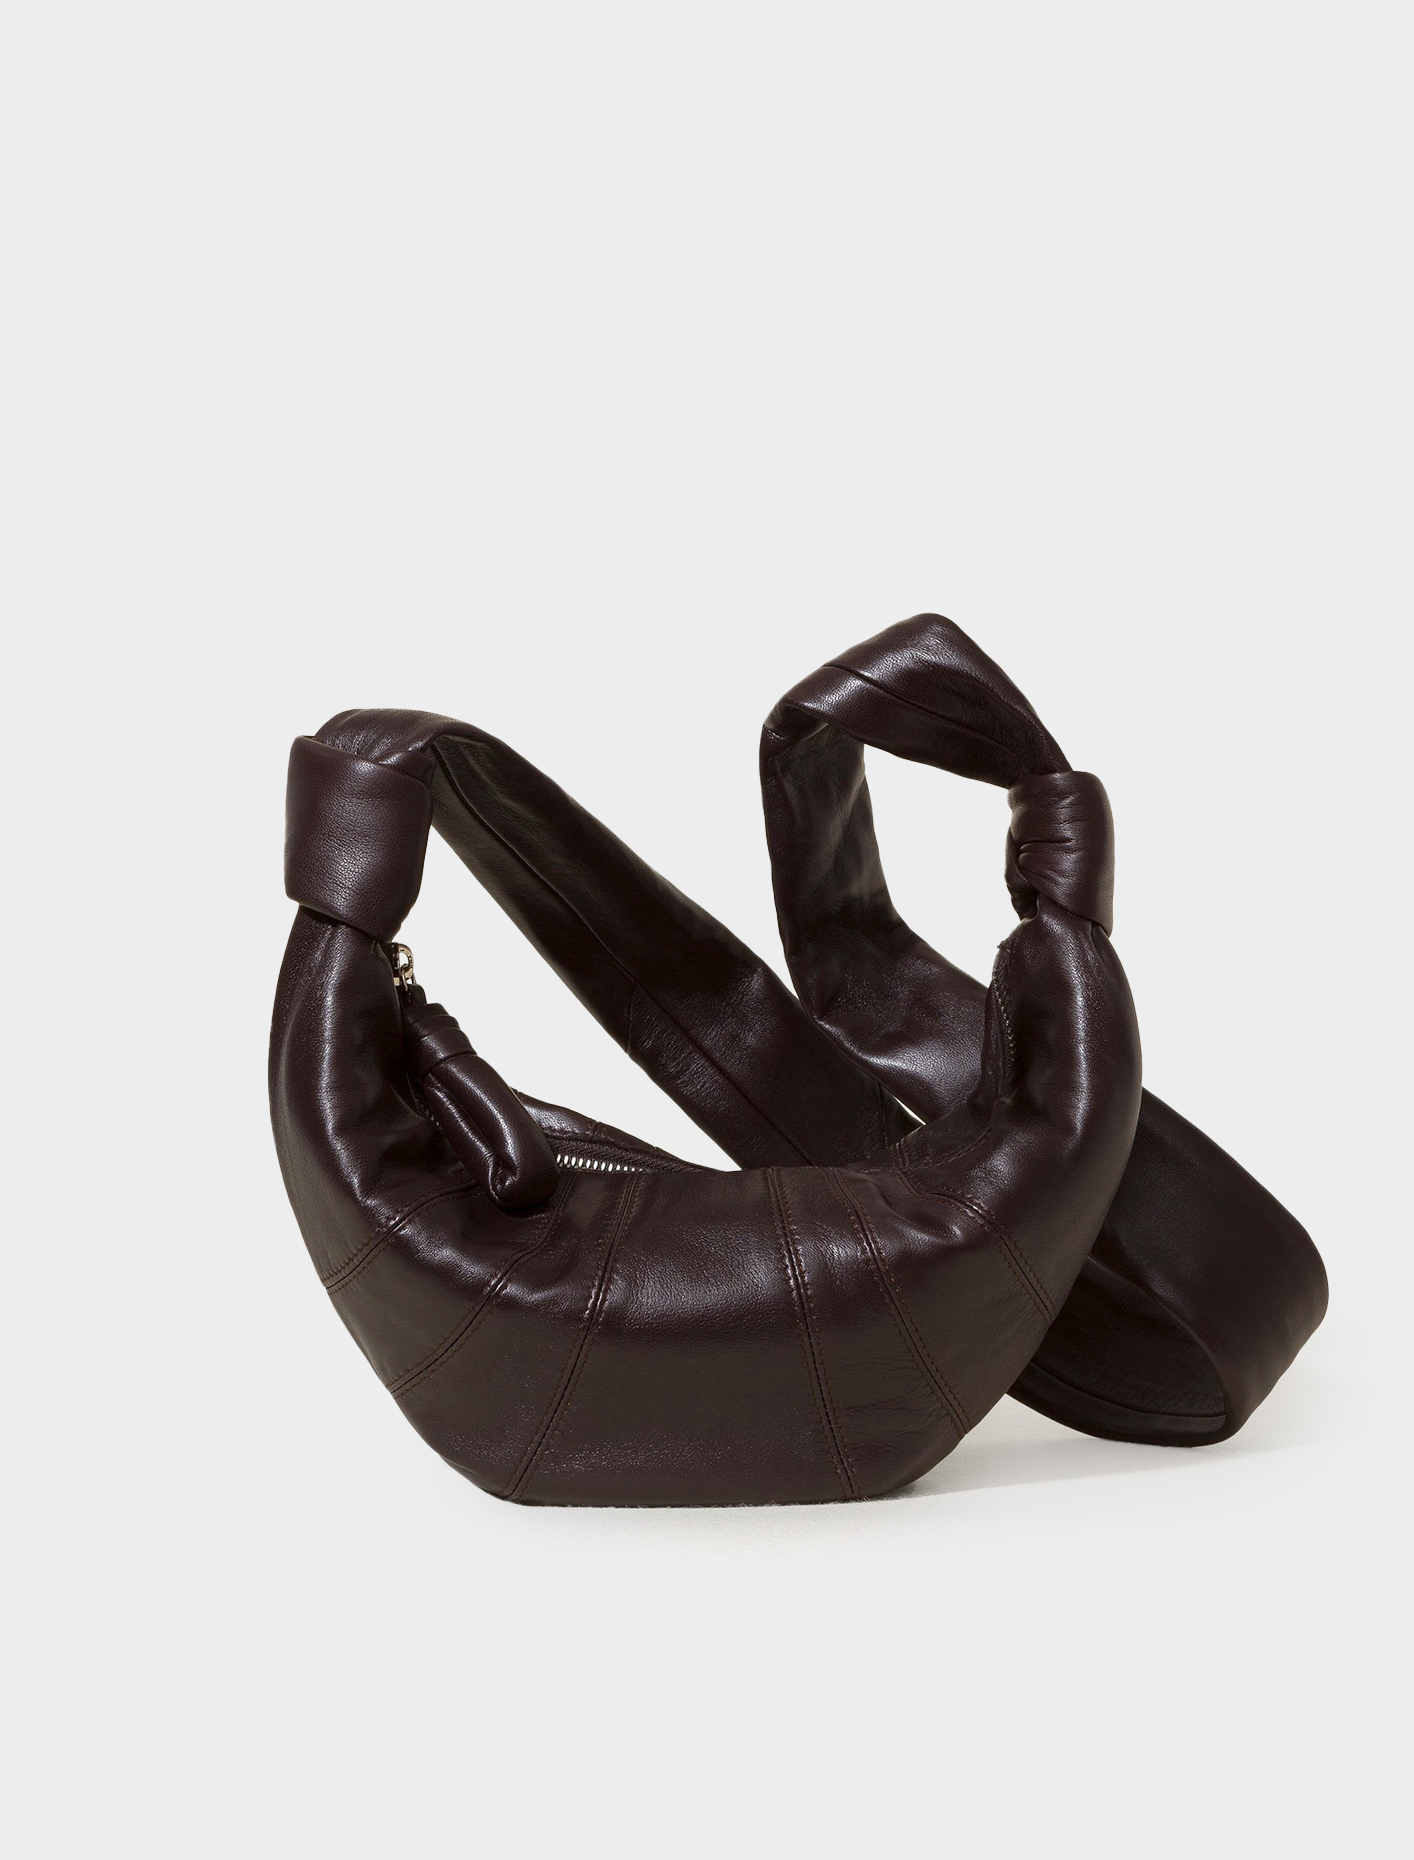 Lemaire Small Croissant Bag in Dark Chocolate | Voo Store Berlin